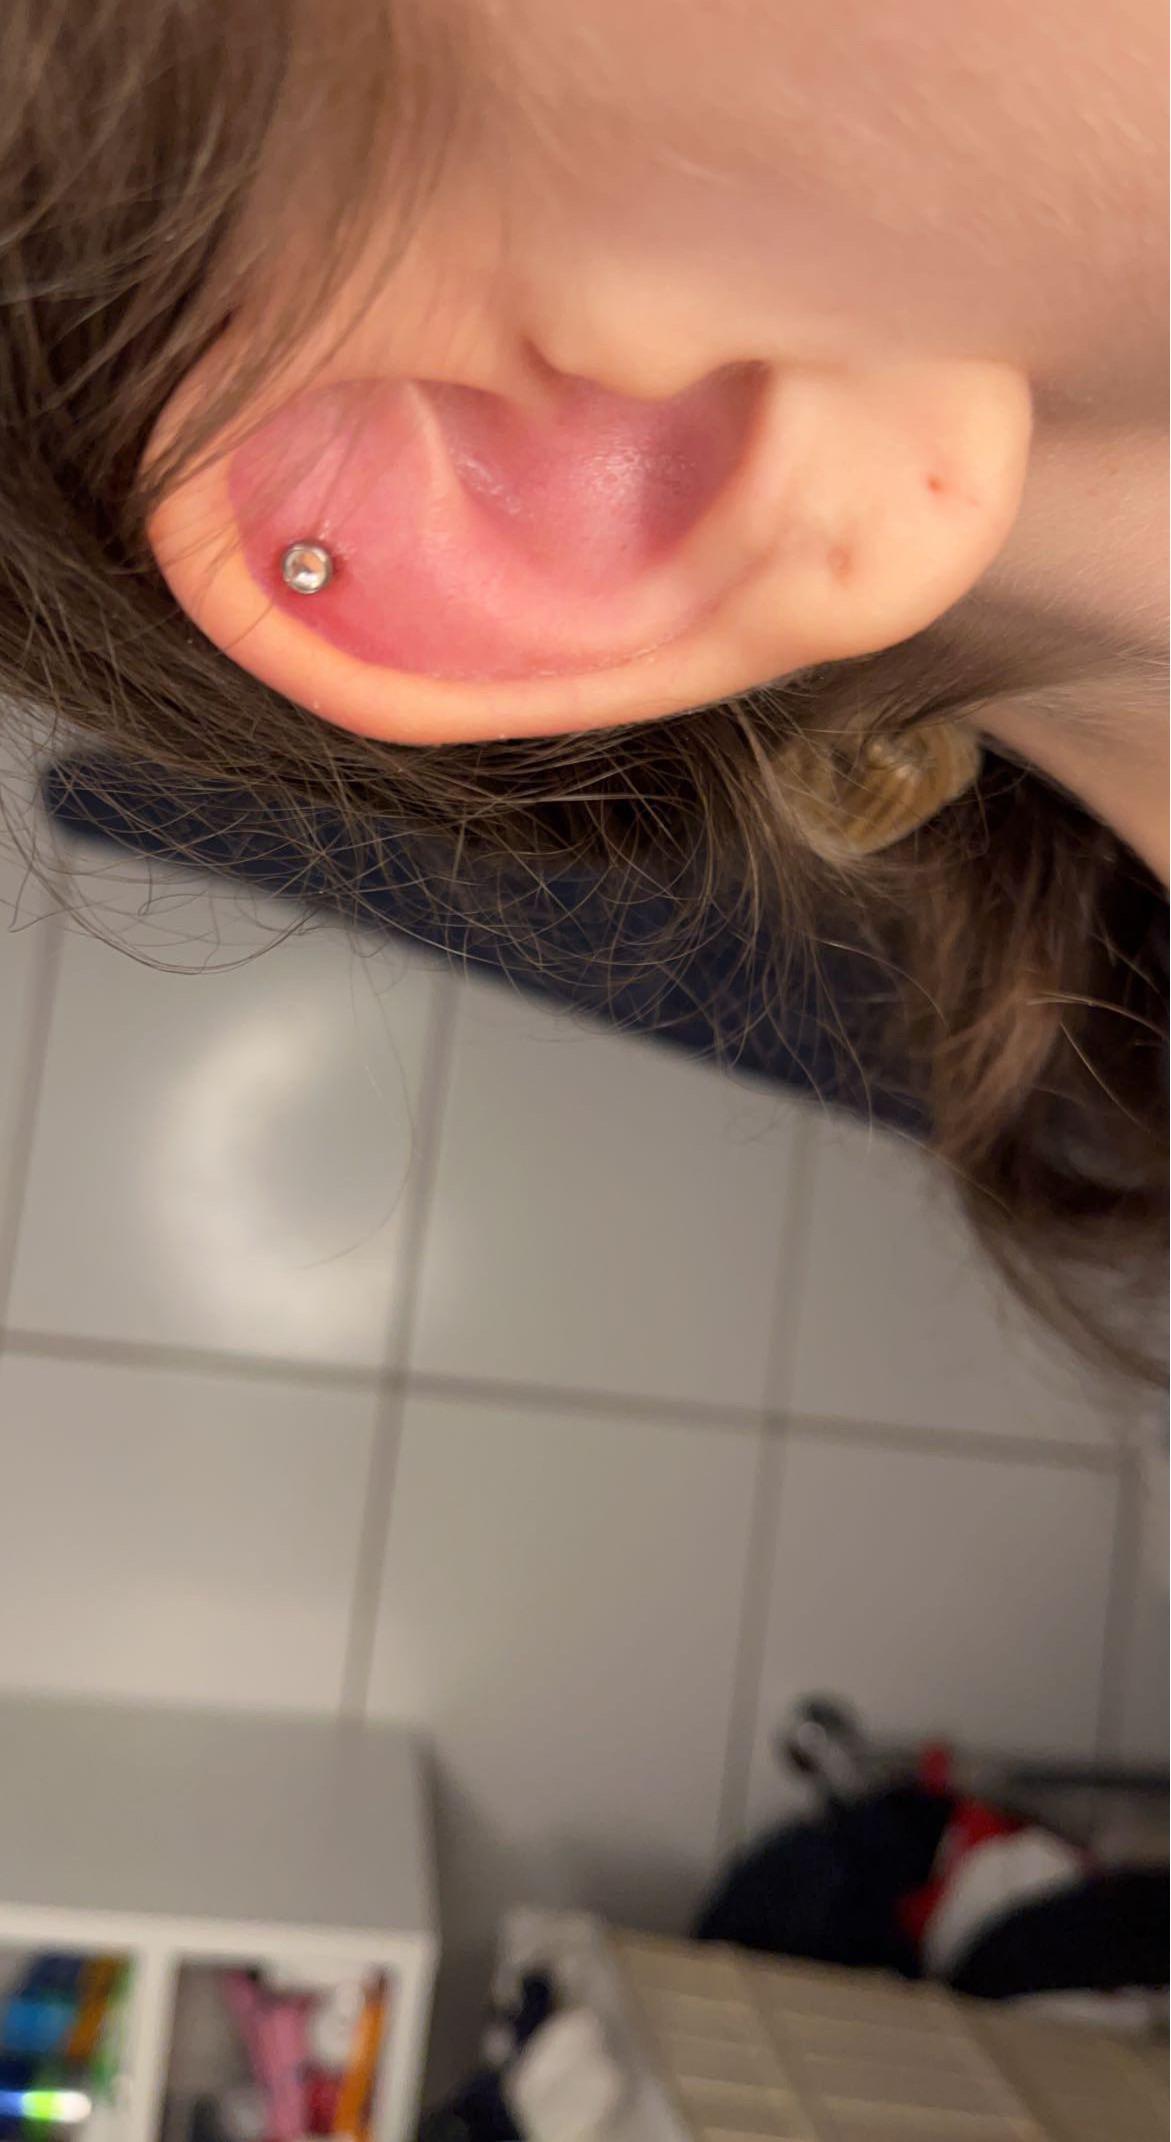 Comparison of a healthy helix piercing and an infected helix piercing